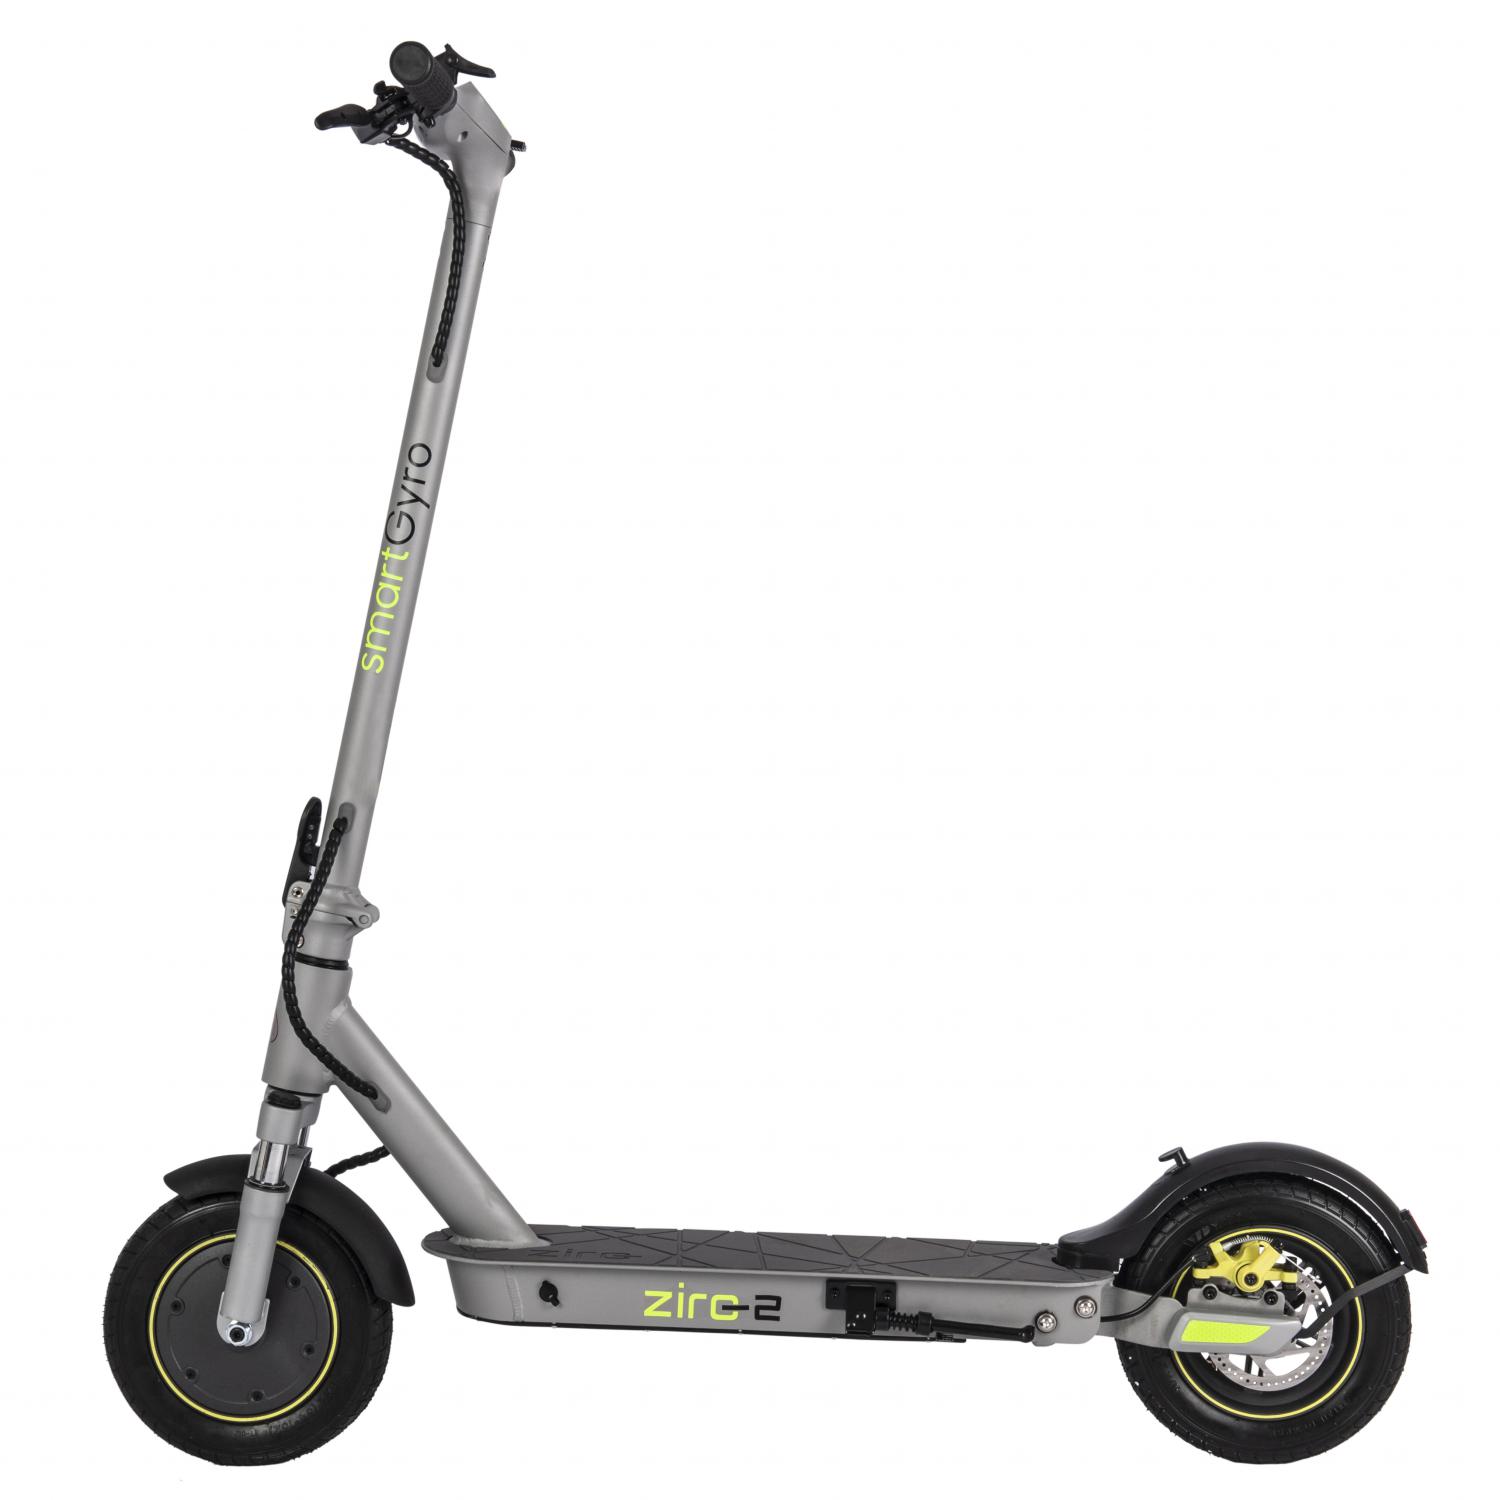 https://360scooters.com/wp-content/uploads/2021/11/copy-of-patinete-electrico-smartgyro-ziro-2-silver.jpg